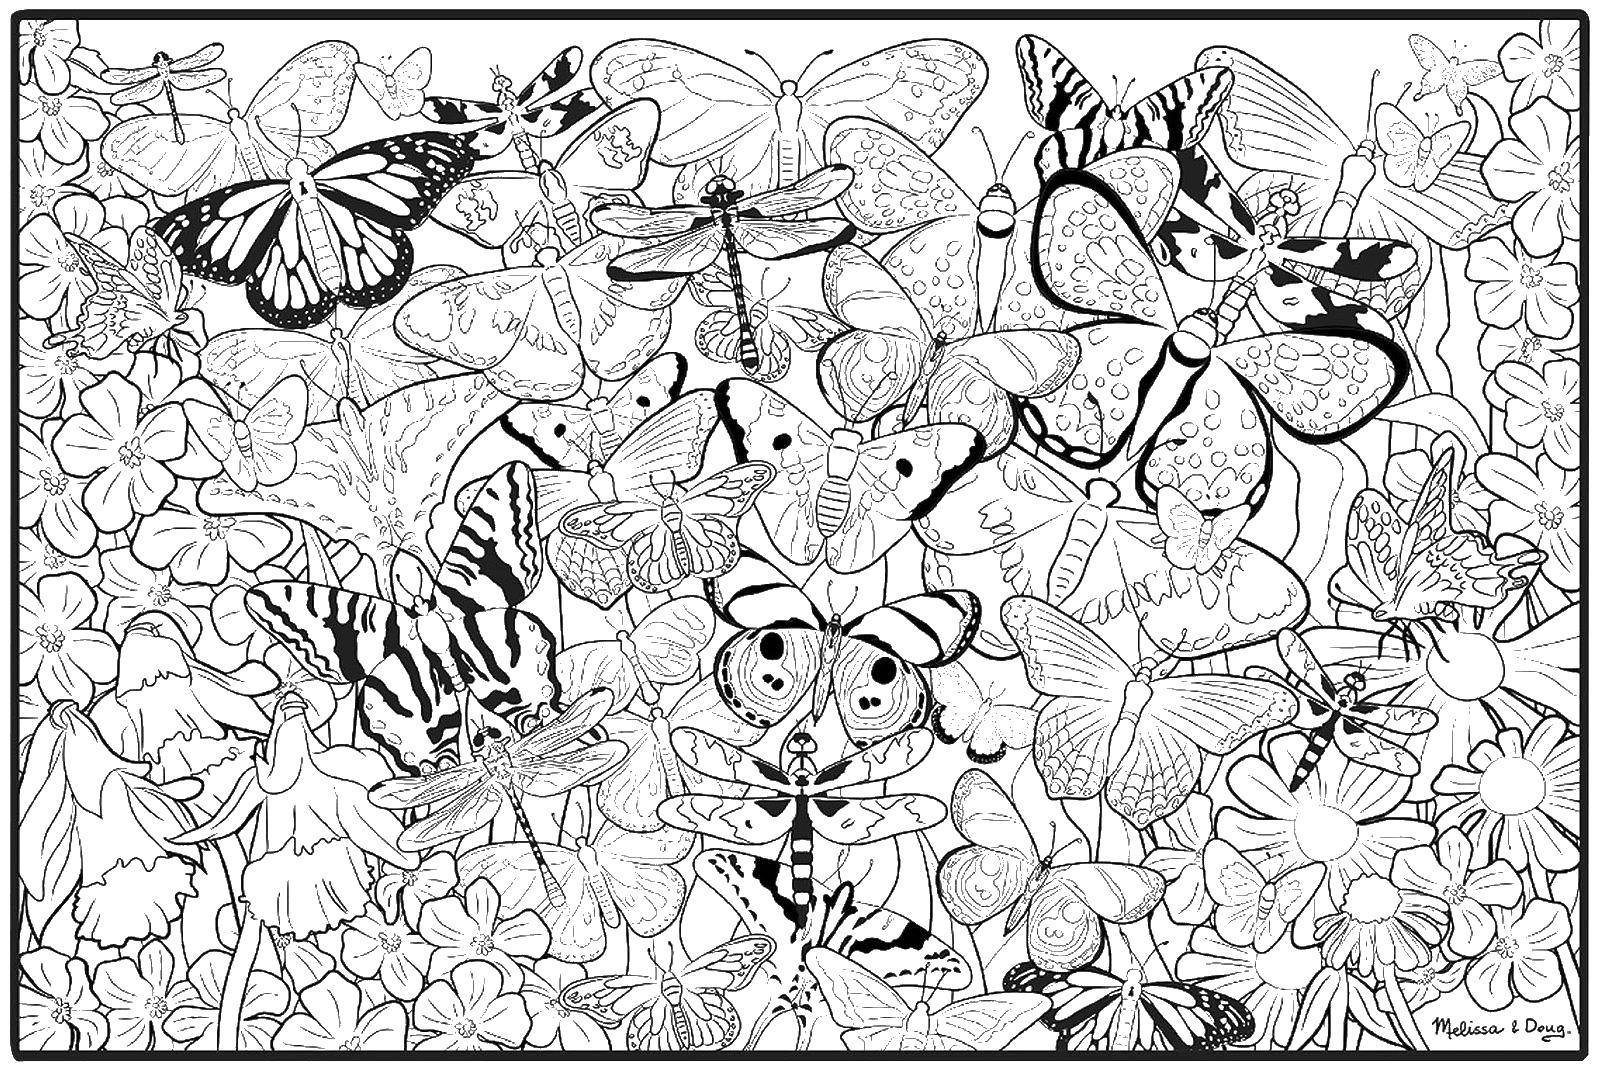 Coloring A lot of butterflies and flowers. Category butterflies. Tags:  butterfly, flowers, grass.